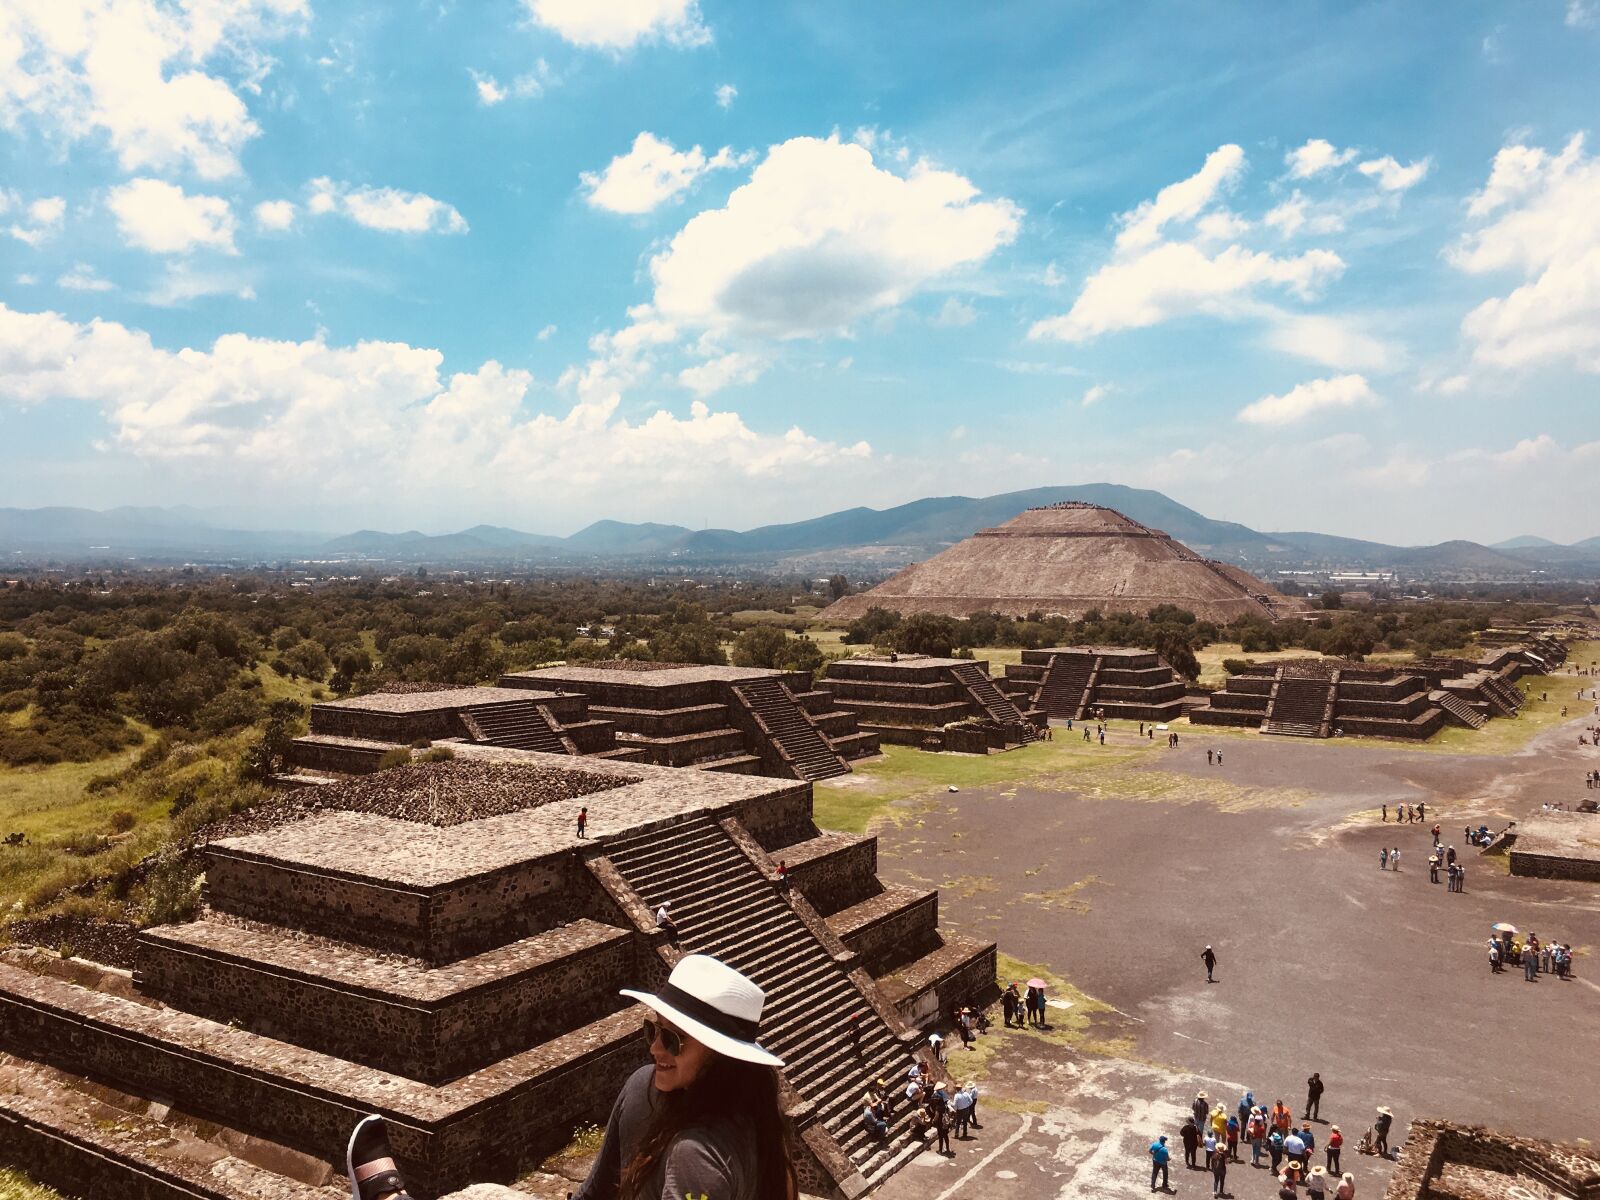 Apple iPhone 6s Plus sample photo. Teotihuacan, mexico, tourism photography